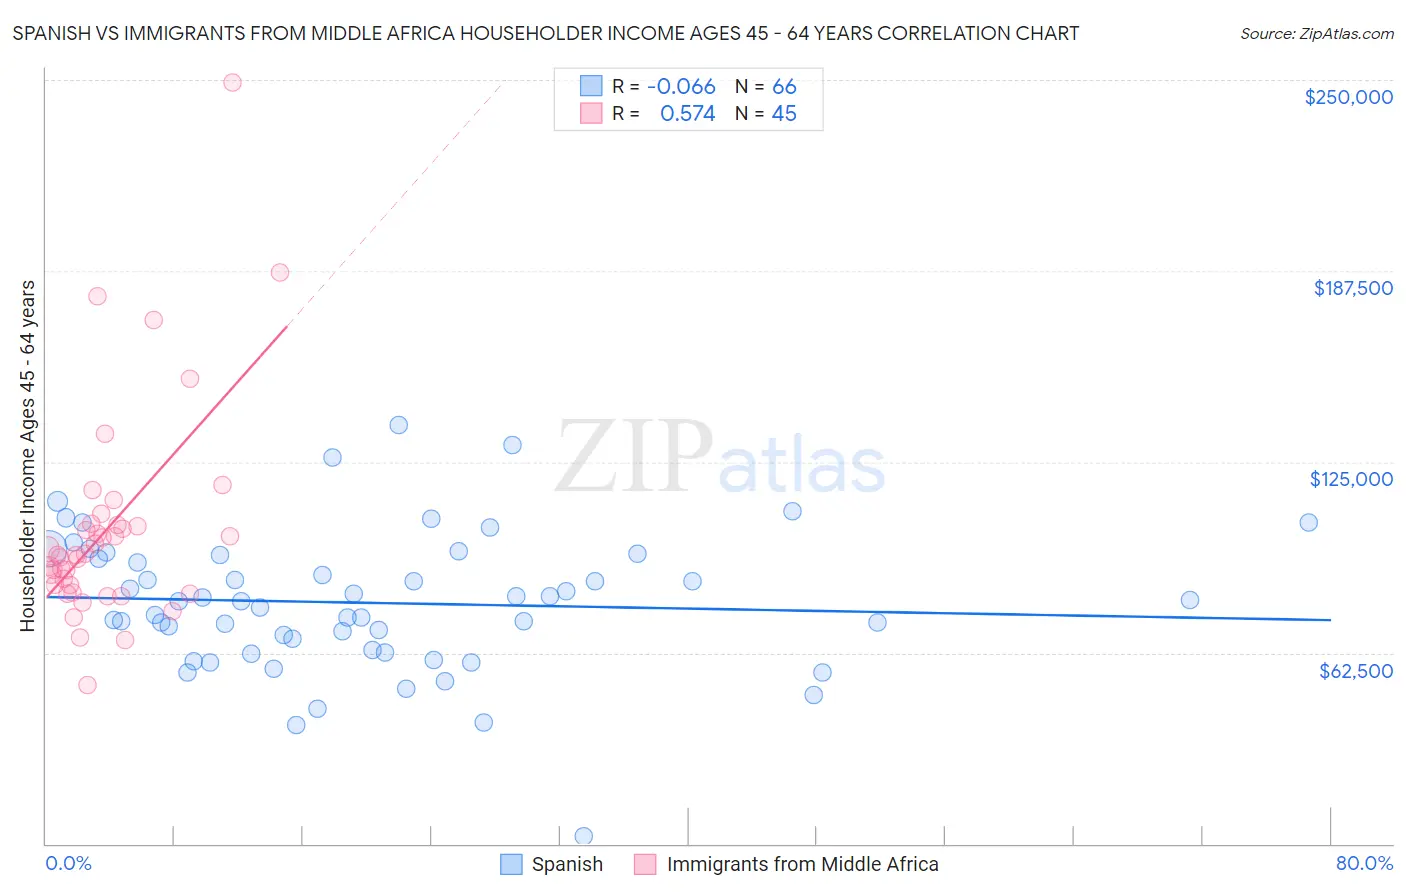 Spanish vs Immigrants from Middle Africa Householder Income Ages 45 - 64 years